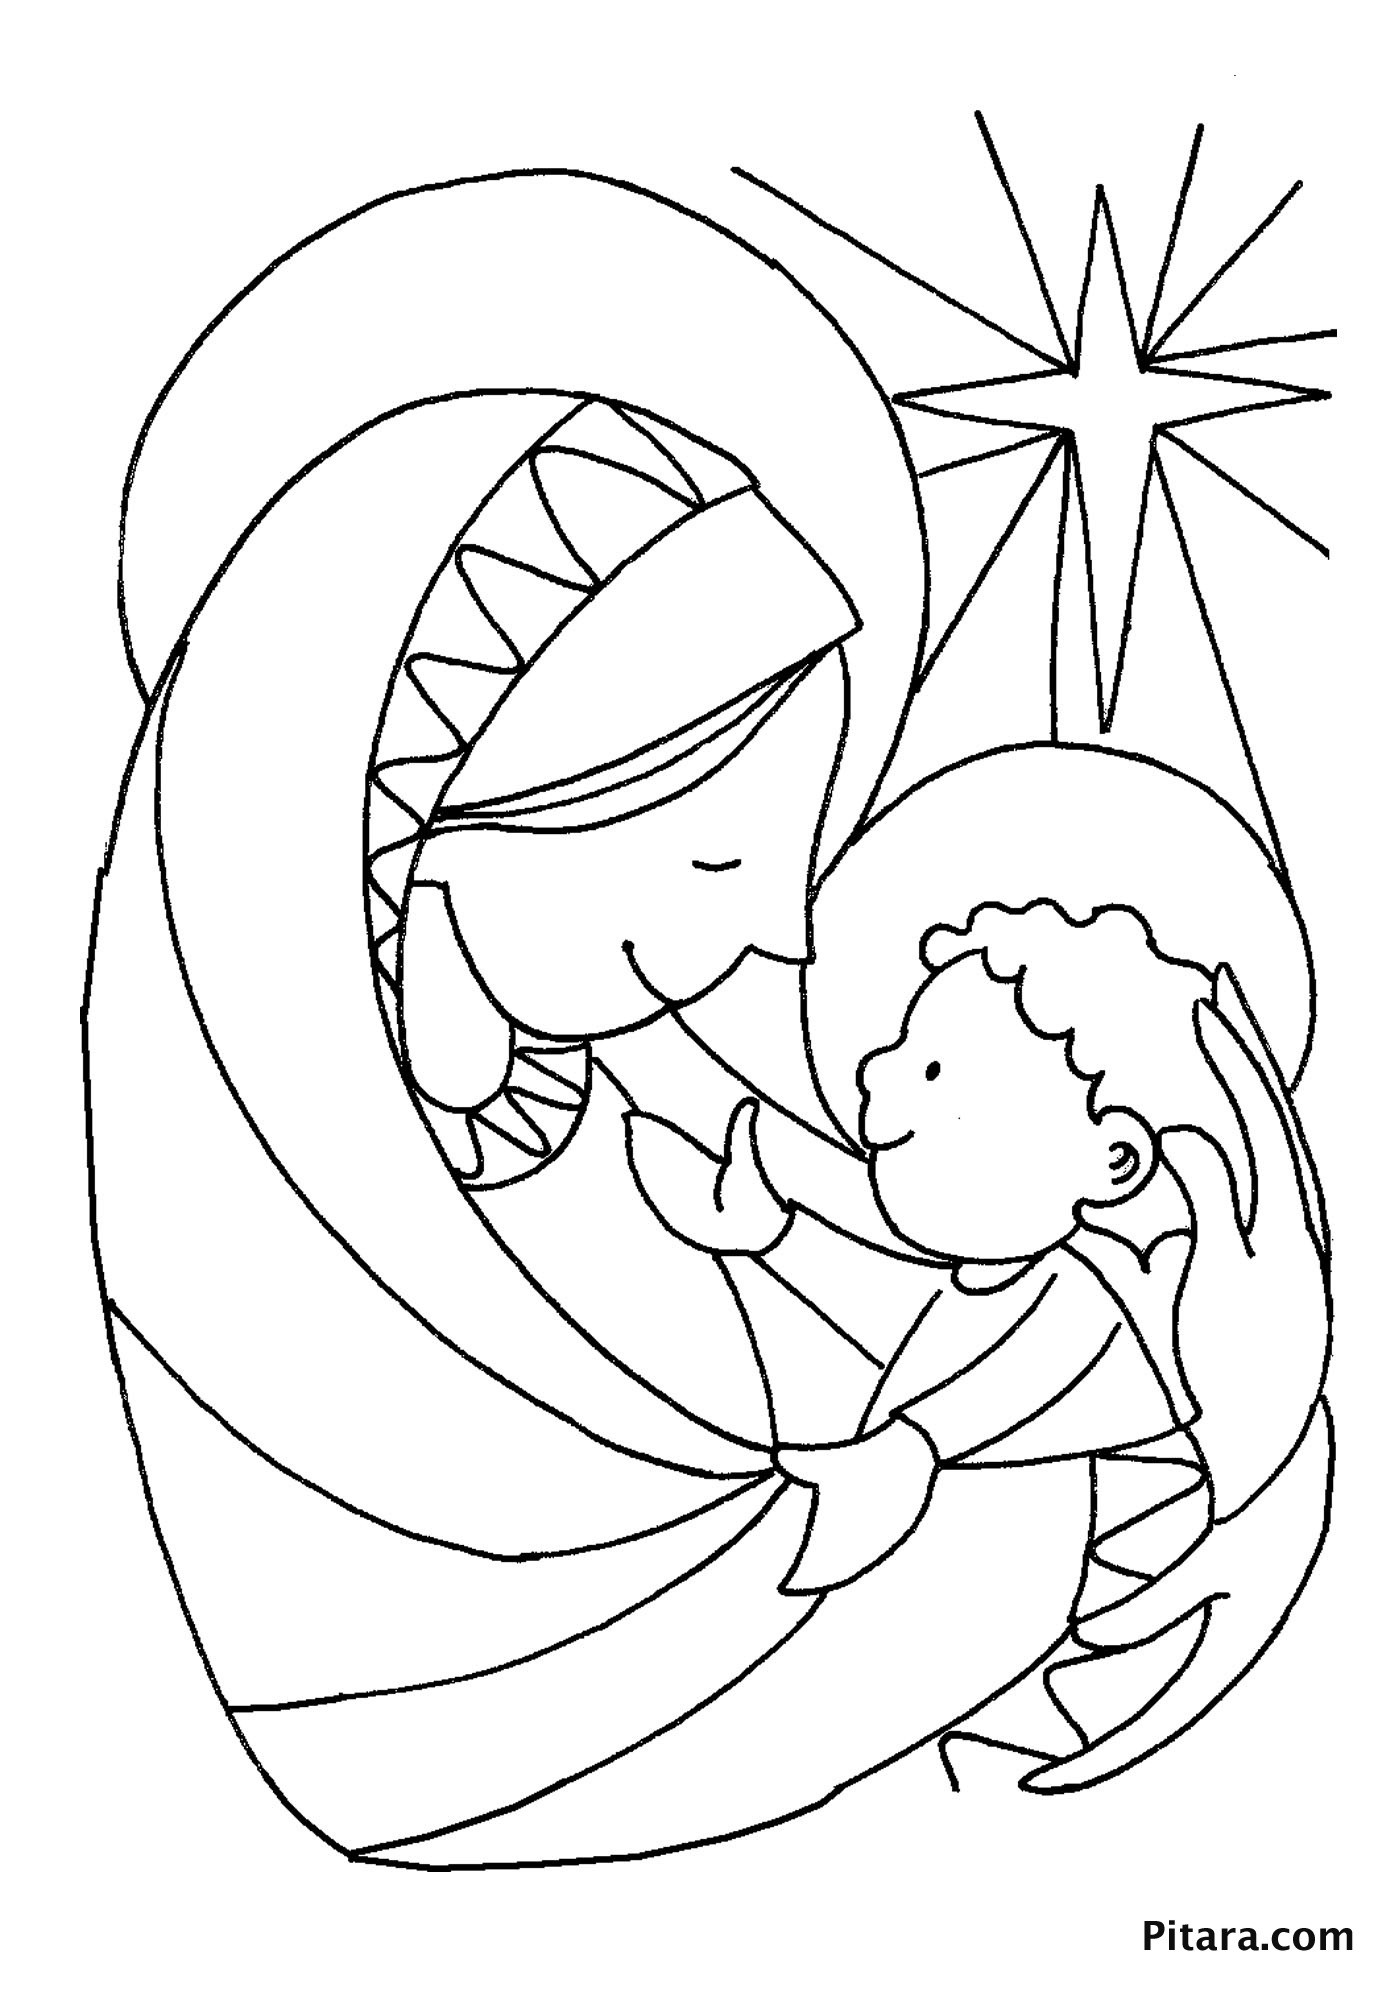 Baby Jesus Coloring Pages Printable Free
 Baby Jesus In the Manger Coloring Pages